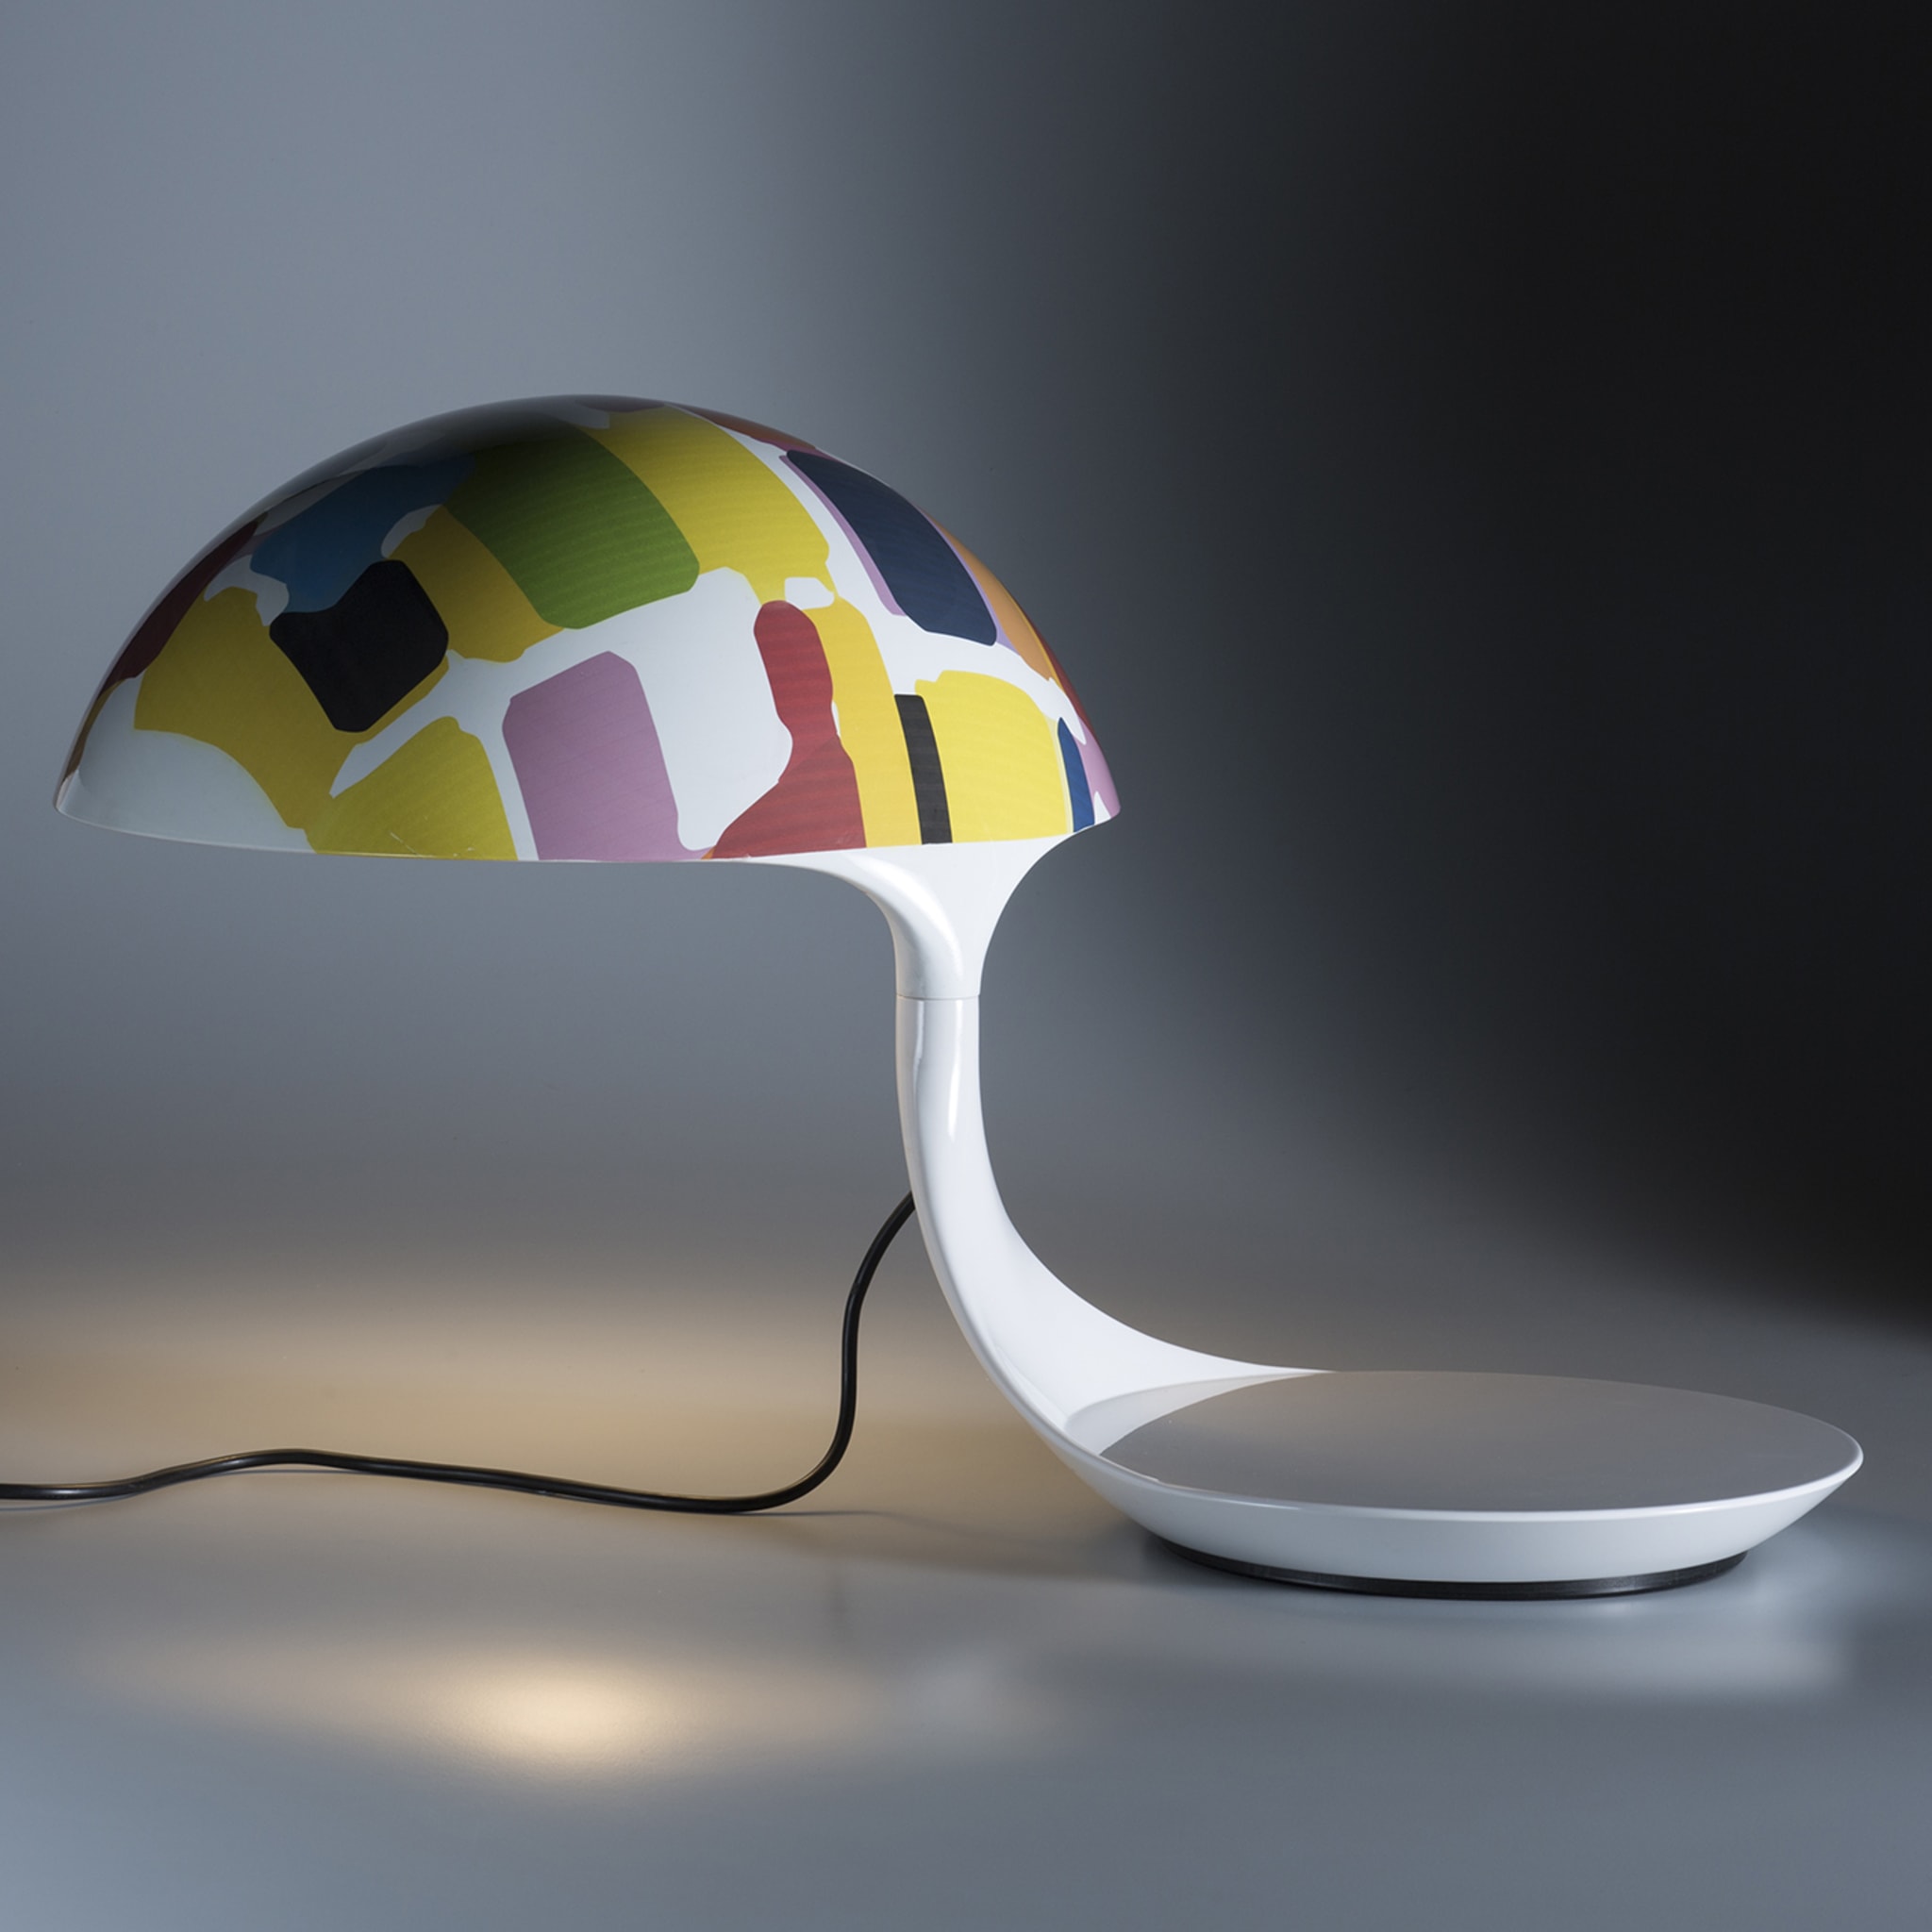 Cobra Texture Polychrome Table Lamp by Michel Bouquillon - Alternative view 2